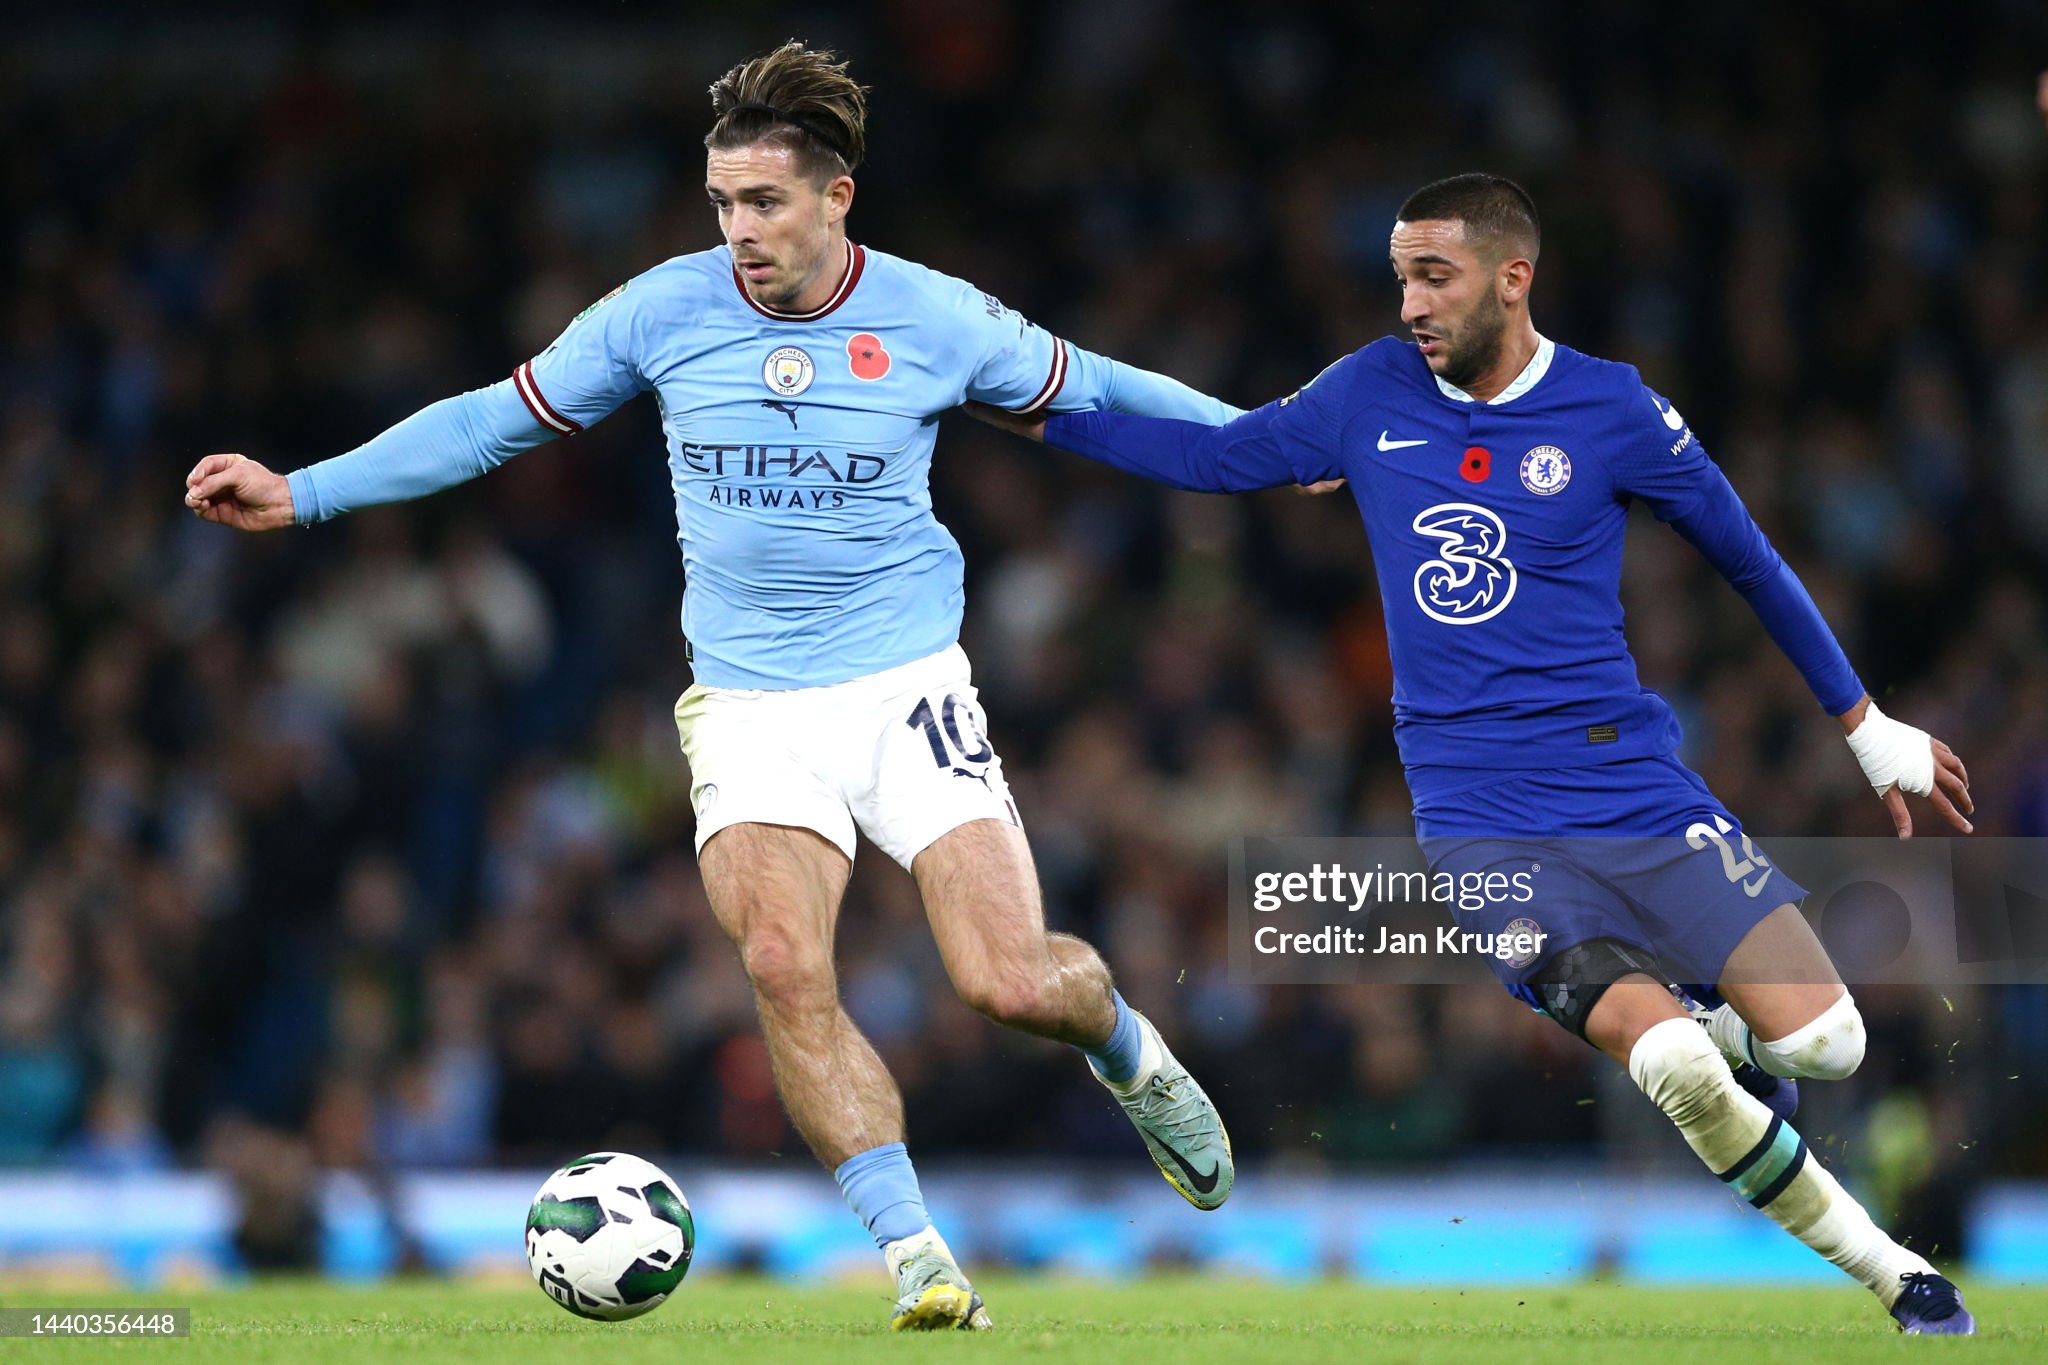 Chelsea vs Manchester City preview, prediction and odds